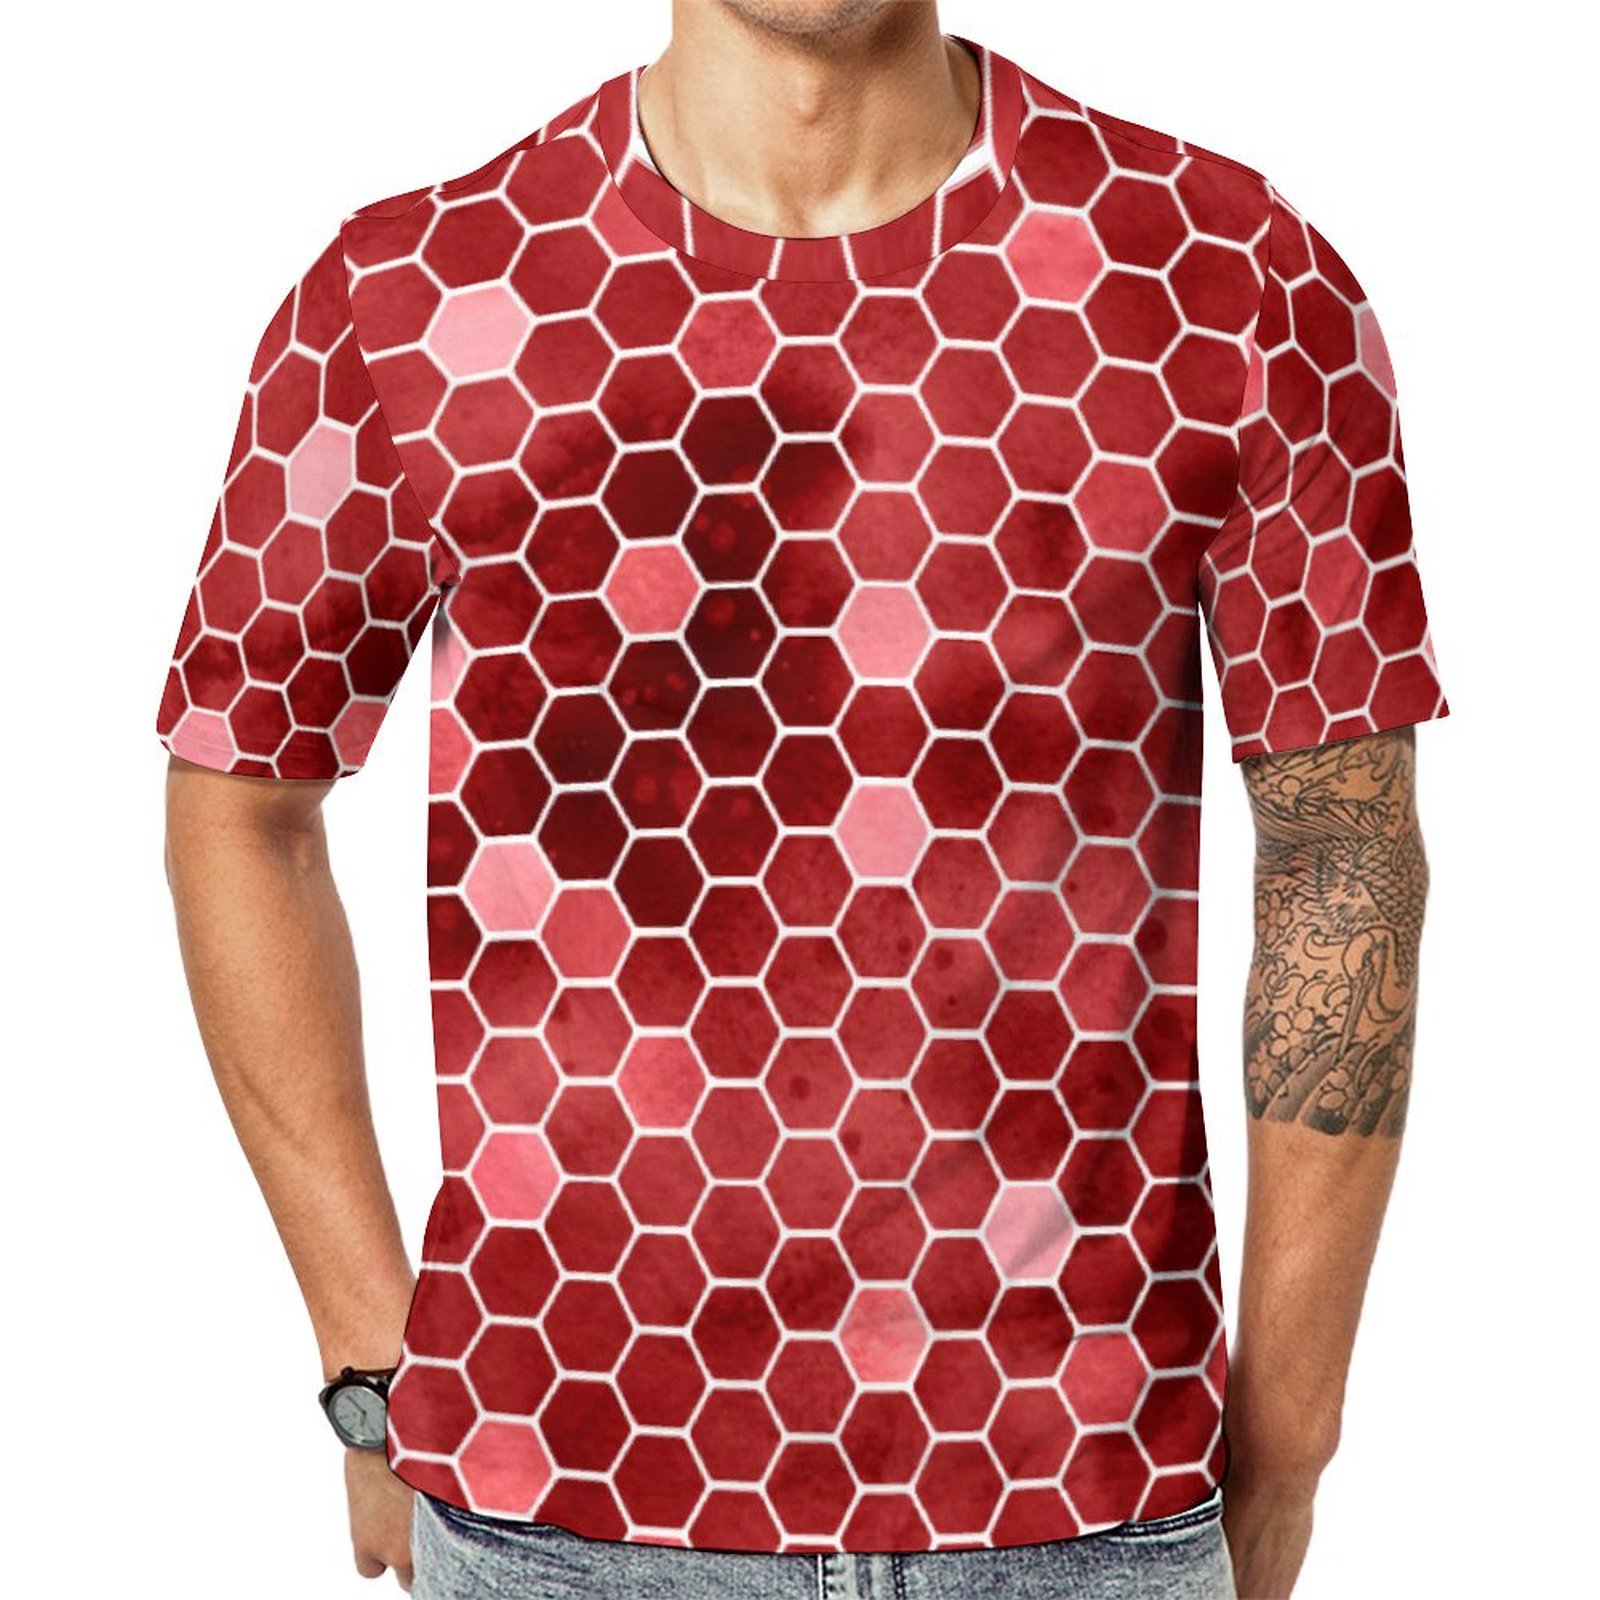 Chic Red And Salmon Pink Honeycomb  Short Sleeve Print Unisex Tshirt Summer Casual Tees for Men and Women Coolcoshirts